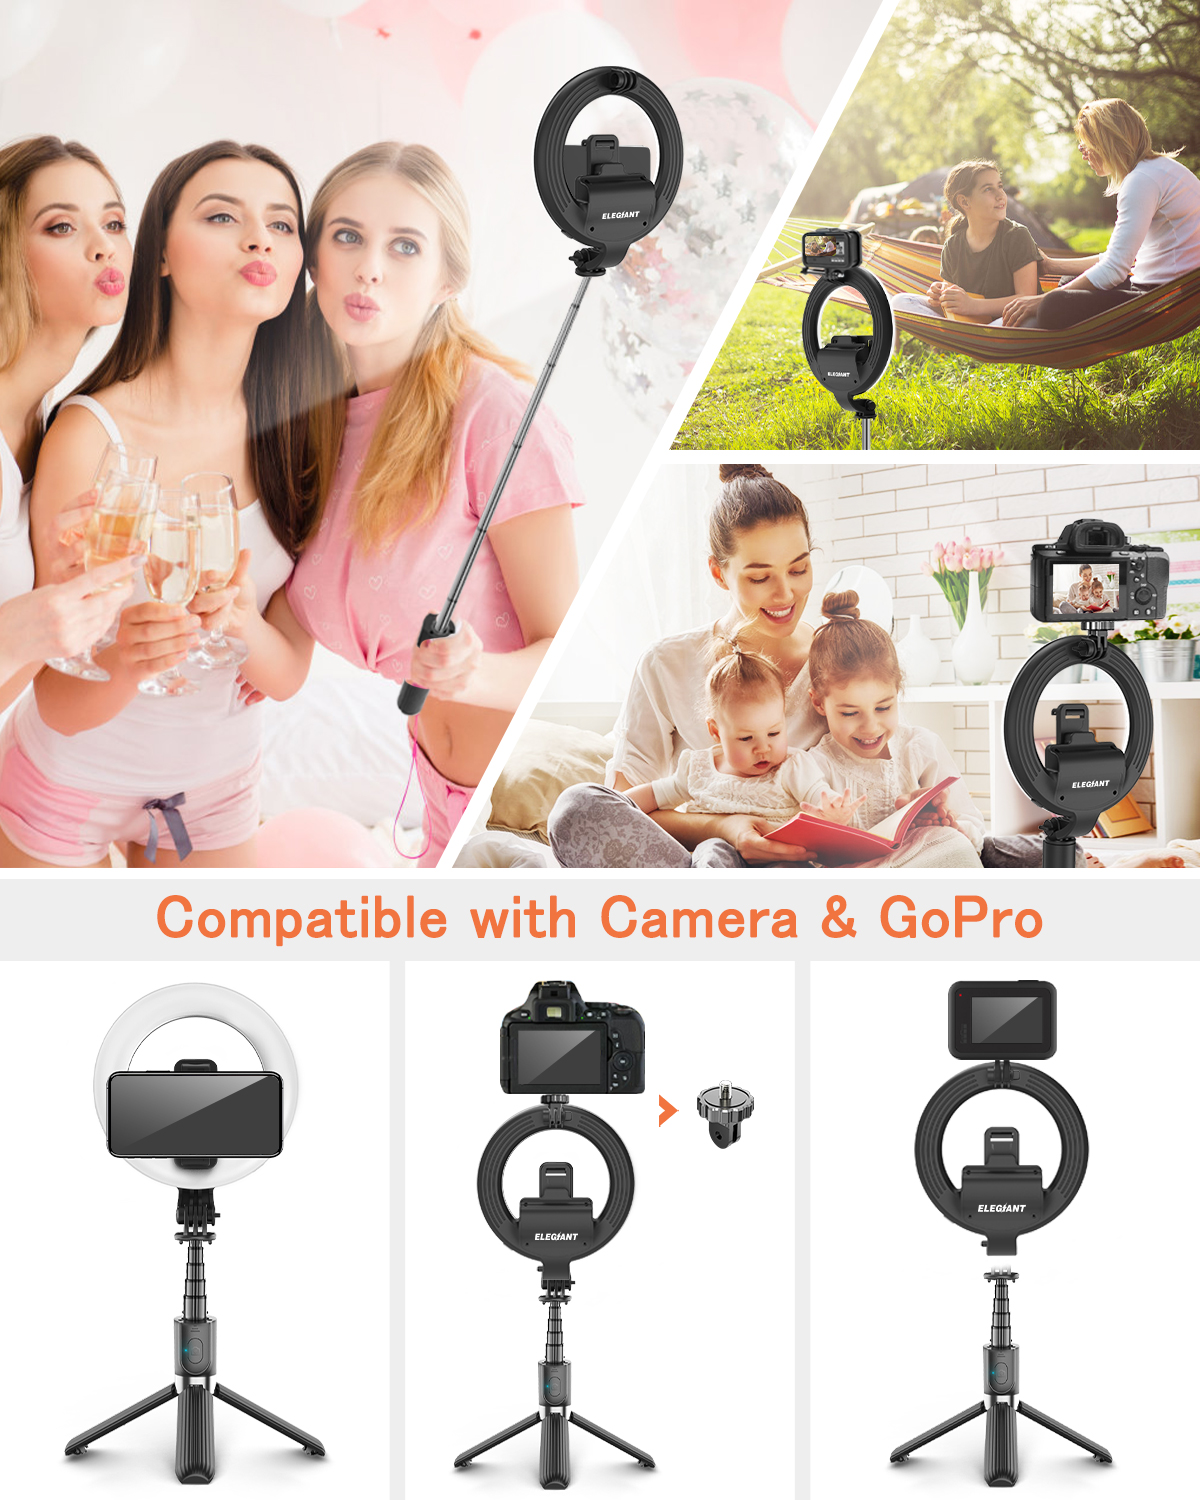 ELEGIANT-EG-09-LED-Ring-Light-Bluetooth-Selfie-Stick-Tripod-with-Remote-Control-Beauty-Fill-Lamp-for-1748938-2